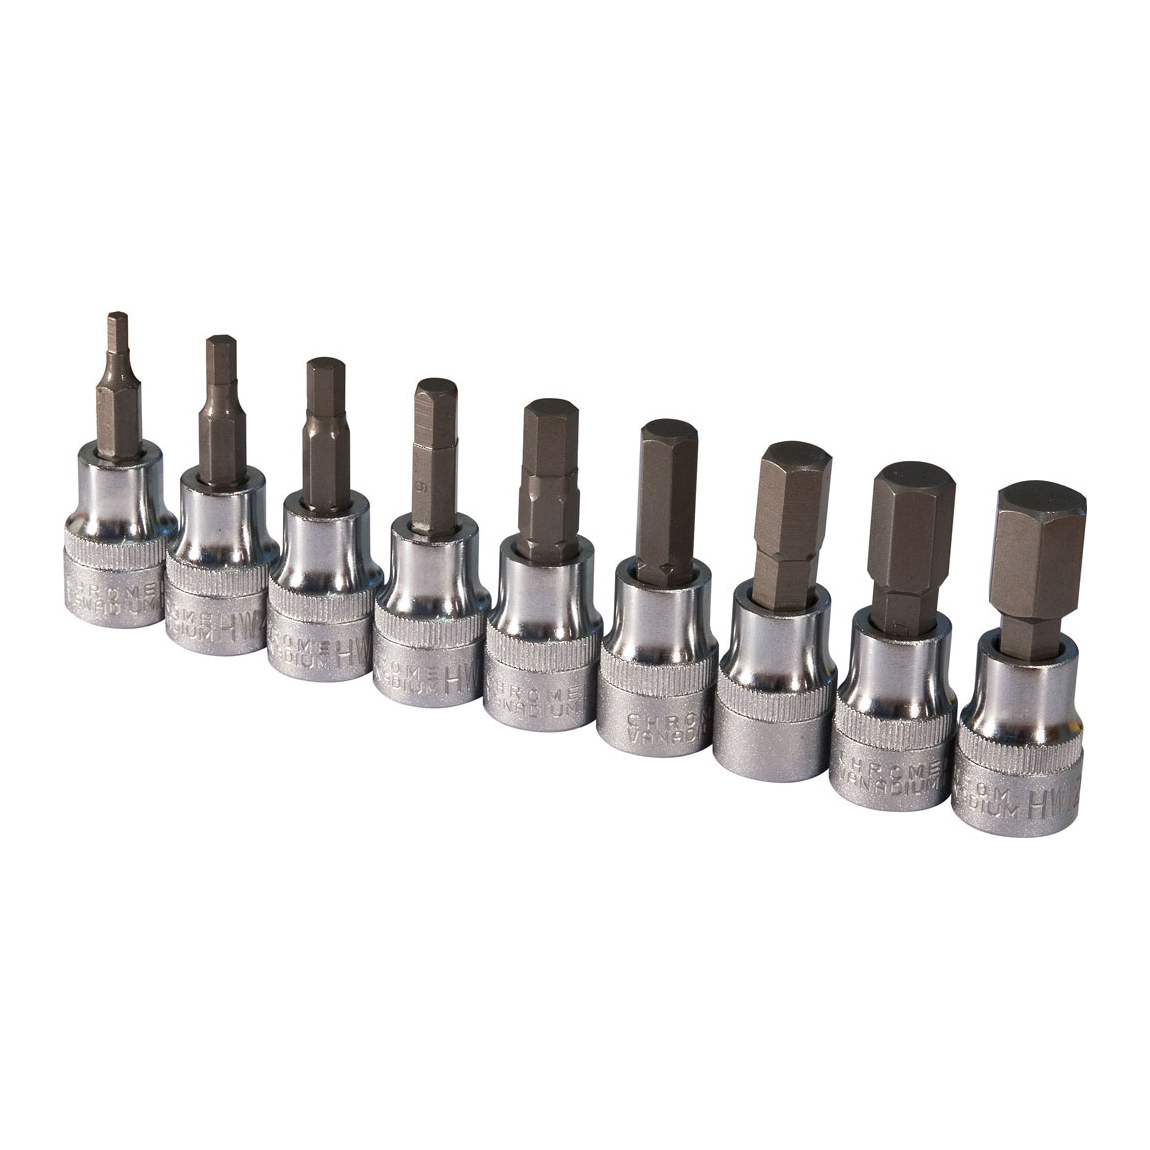 9 Piece Metric 3/8 Drive In-Hex Socket Set - SIDCHROME Tools